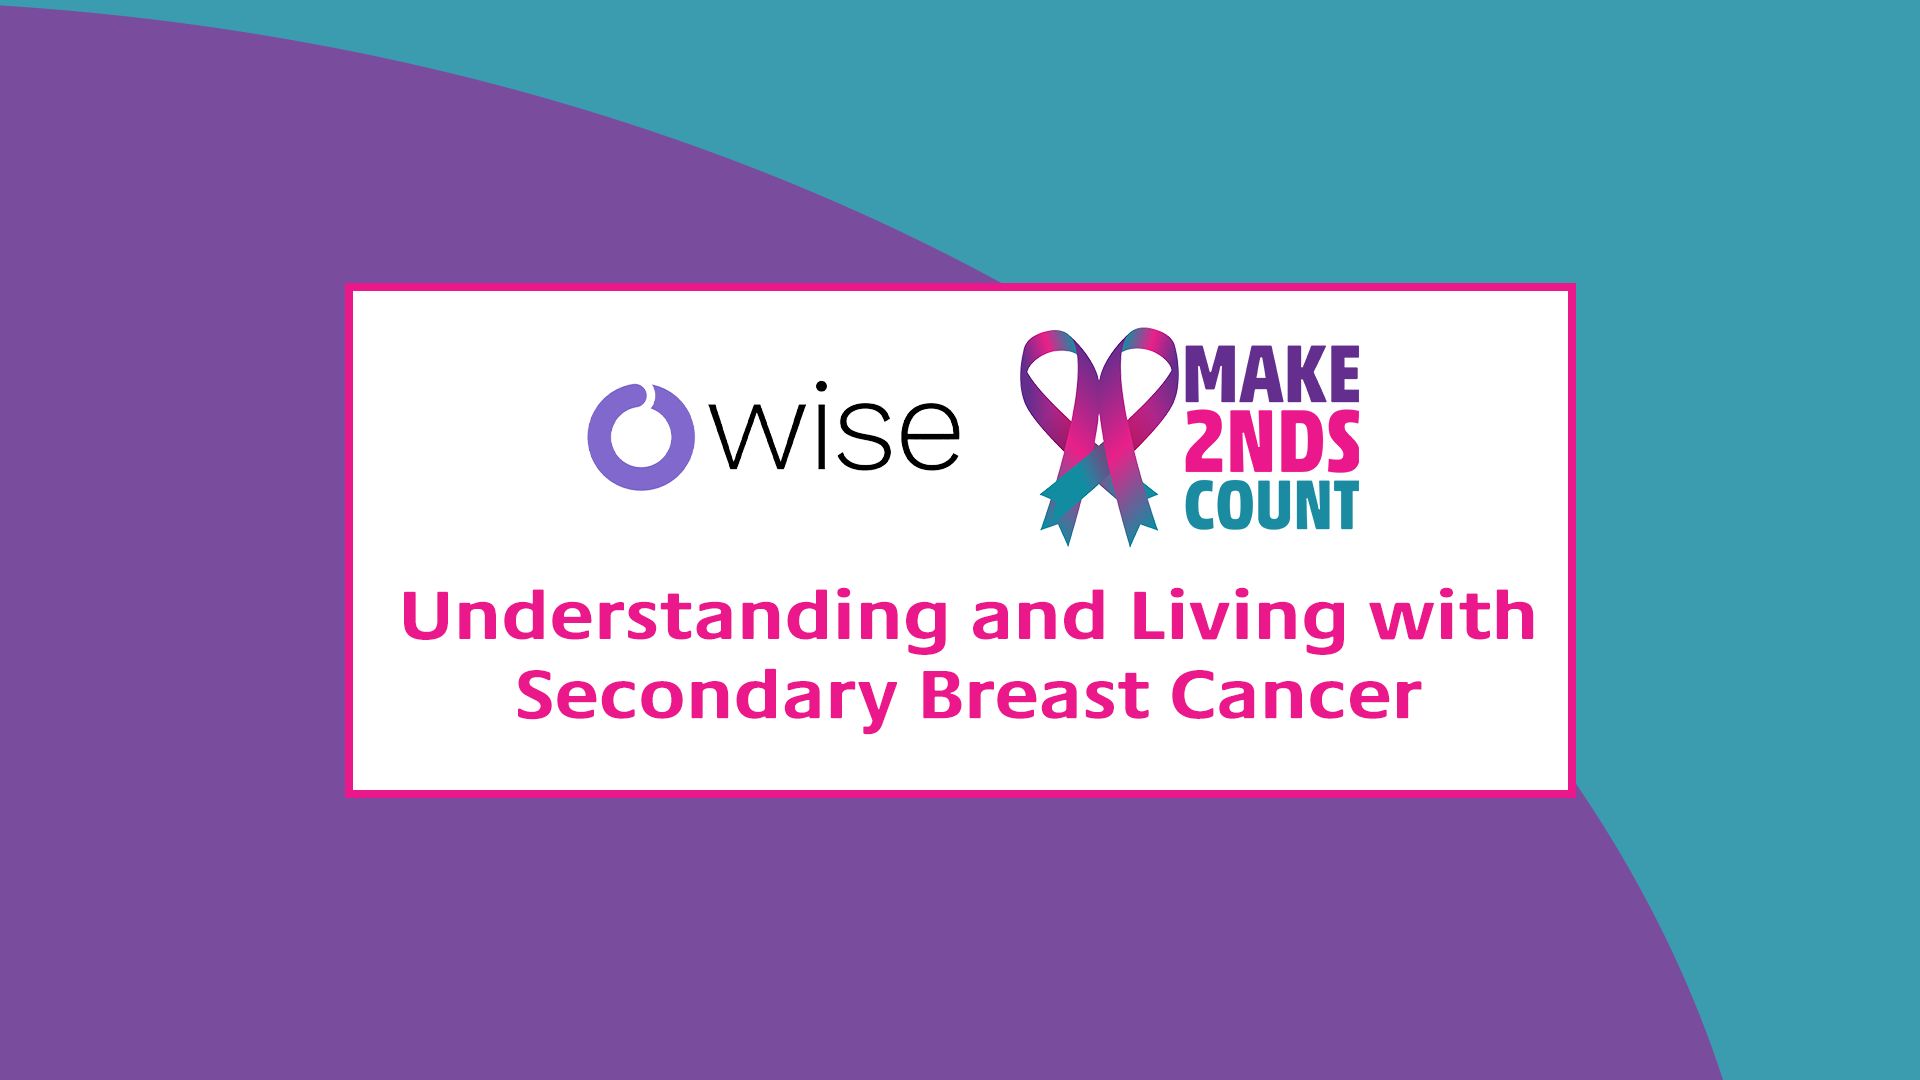 OWise and Make 2nds Count Partnership Blog Series